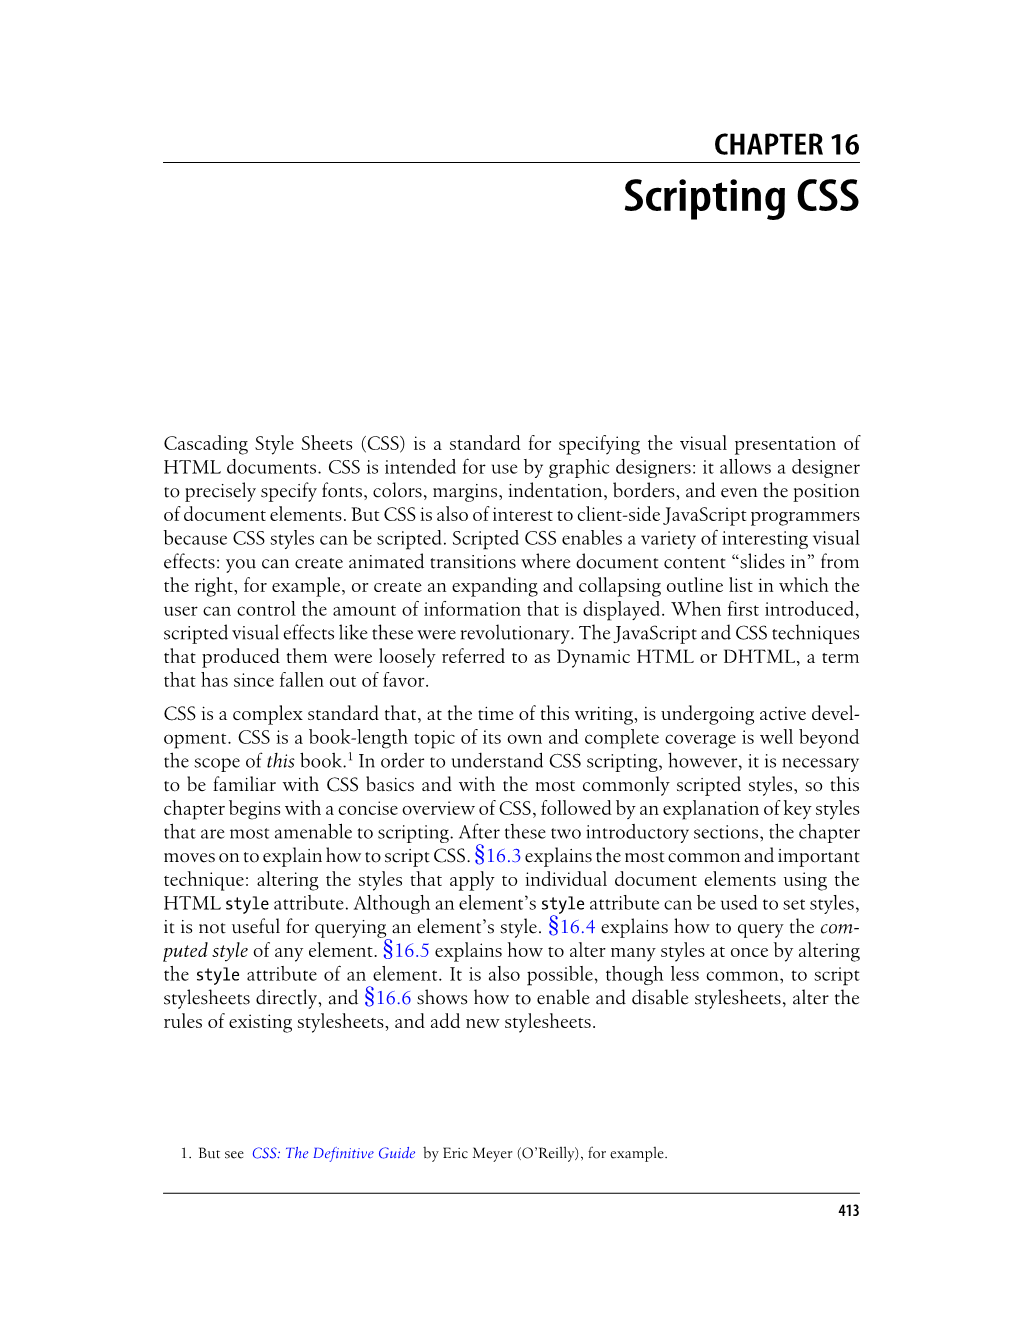 CHAPTER 16 Scripting CSS